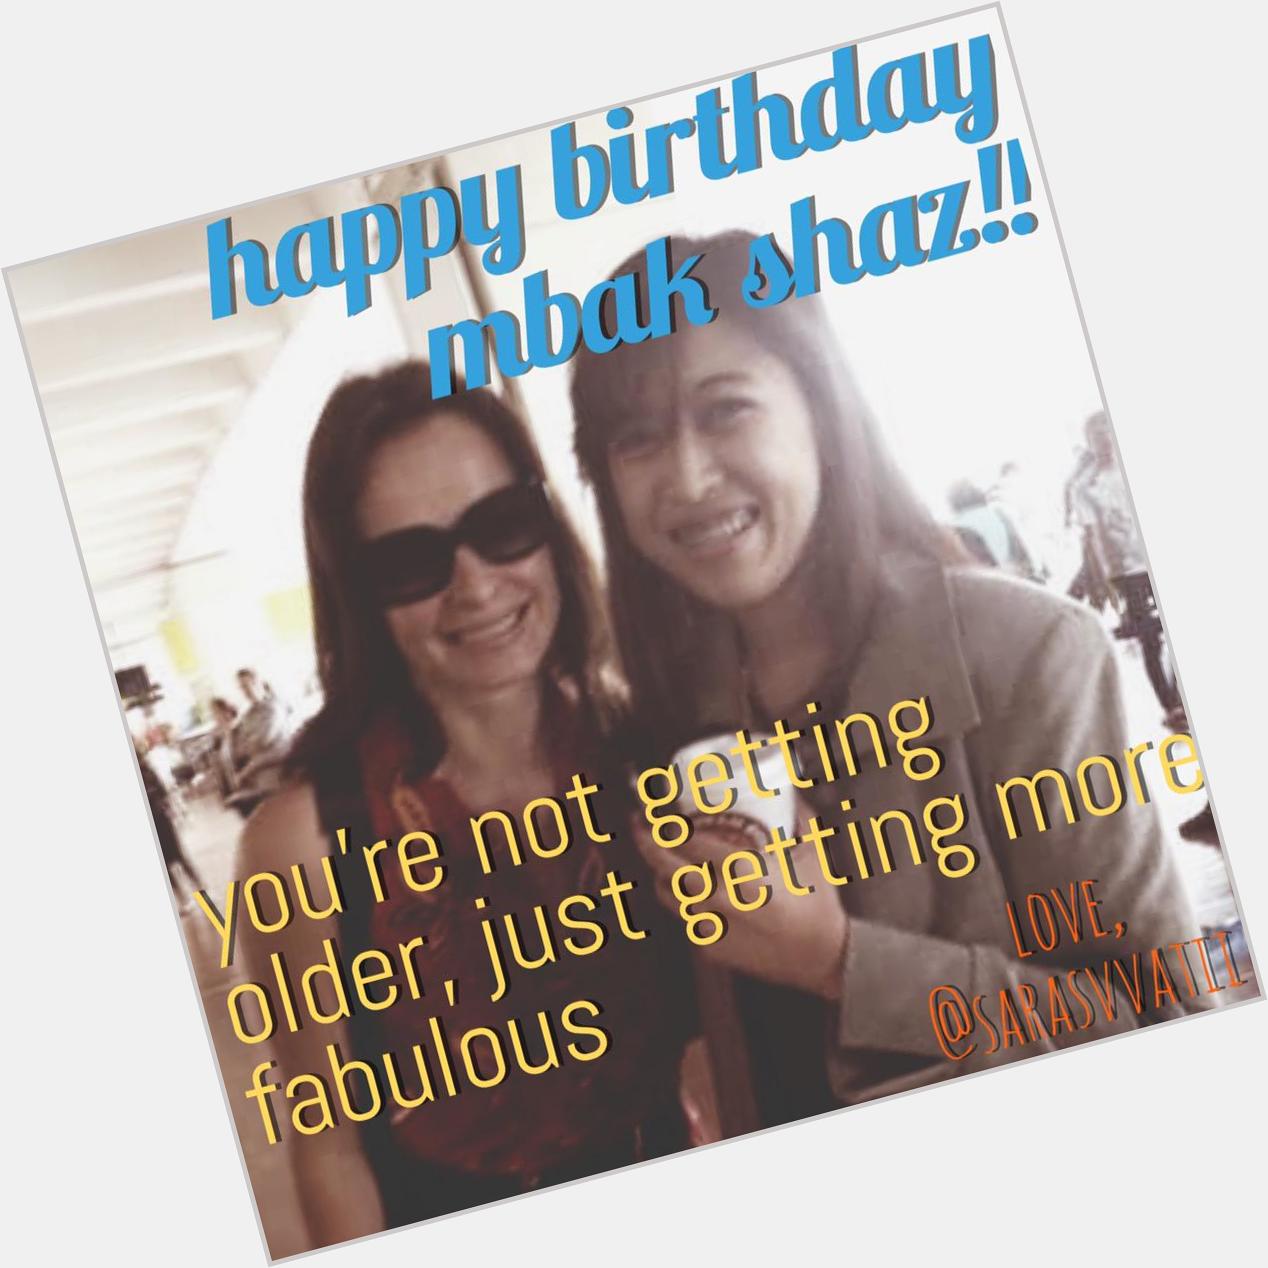 Happy birthday mbak shaz ! You\re not getting older, just get more fabulous!! Indonesia loves you   